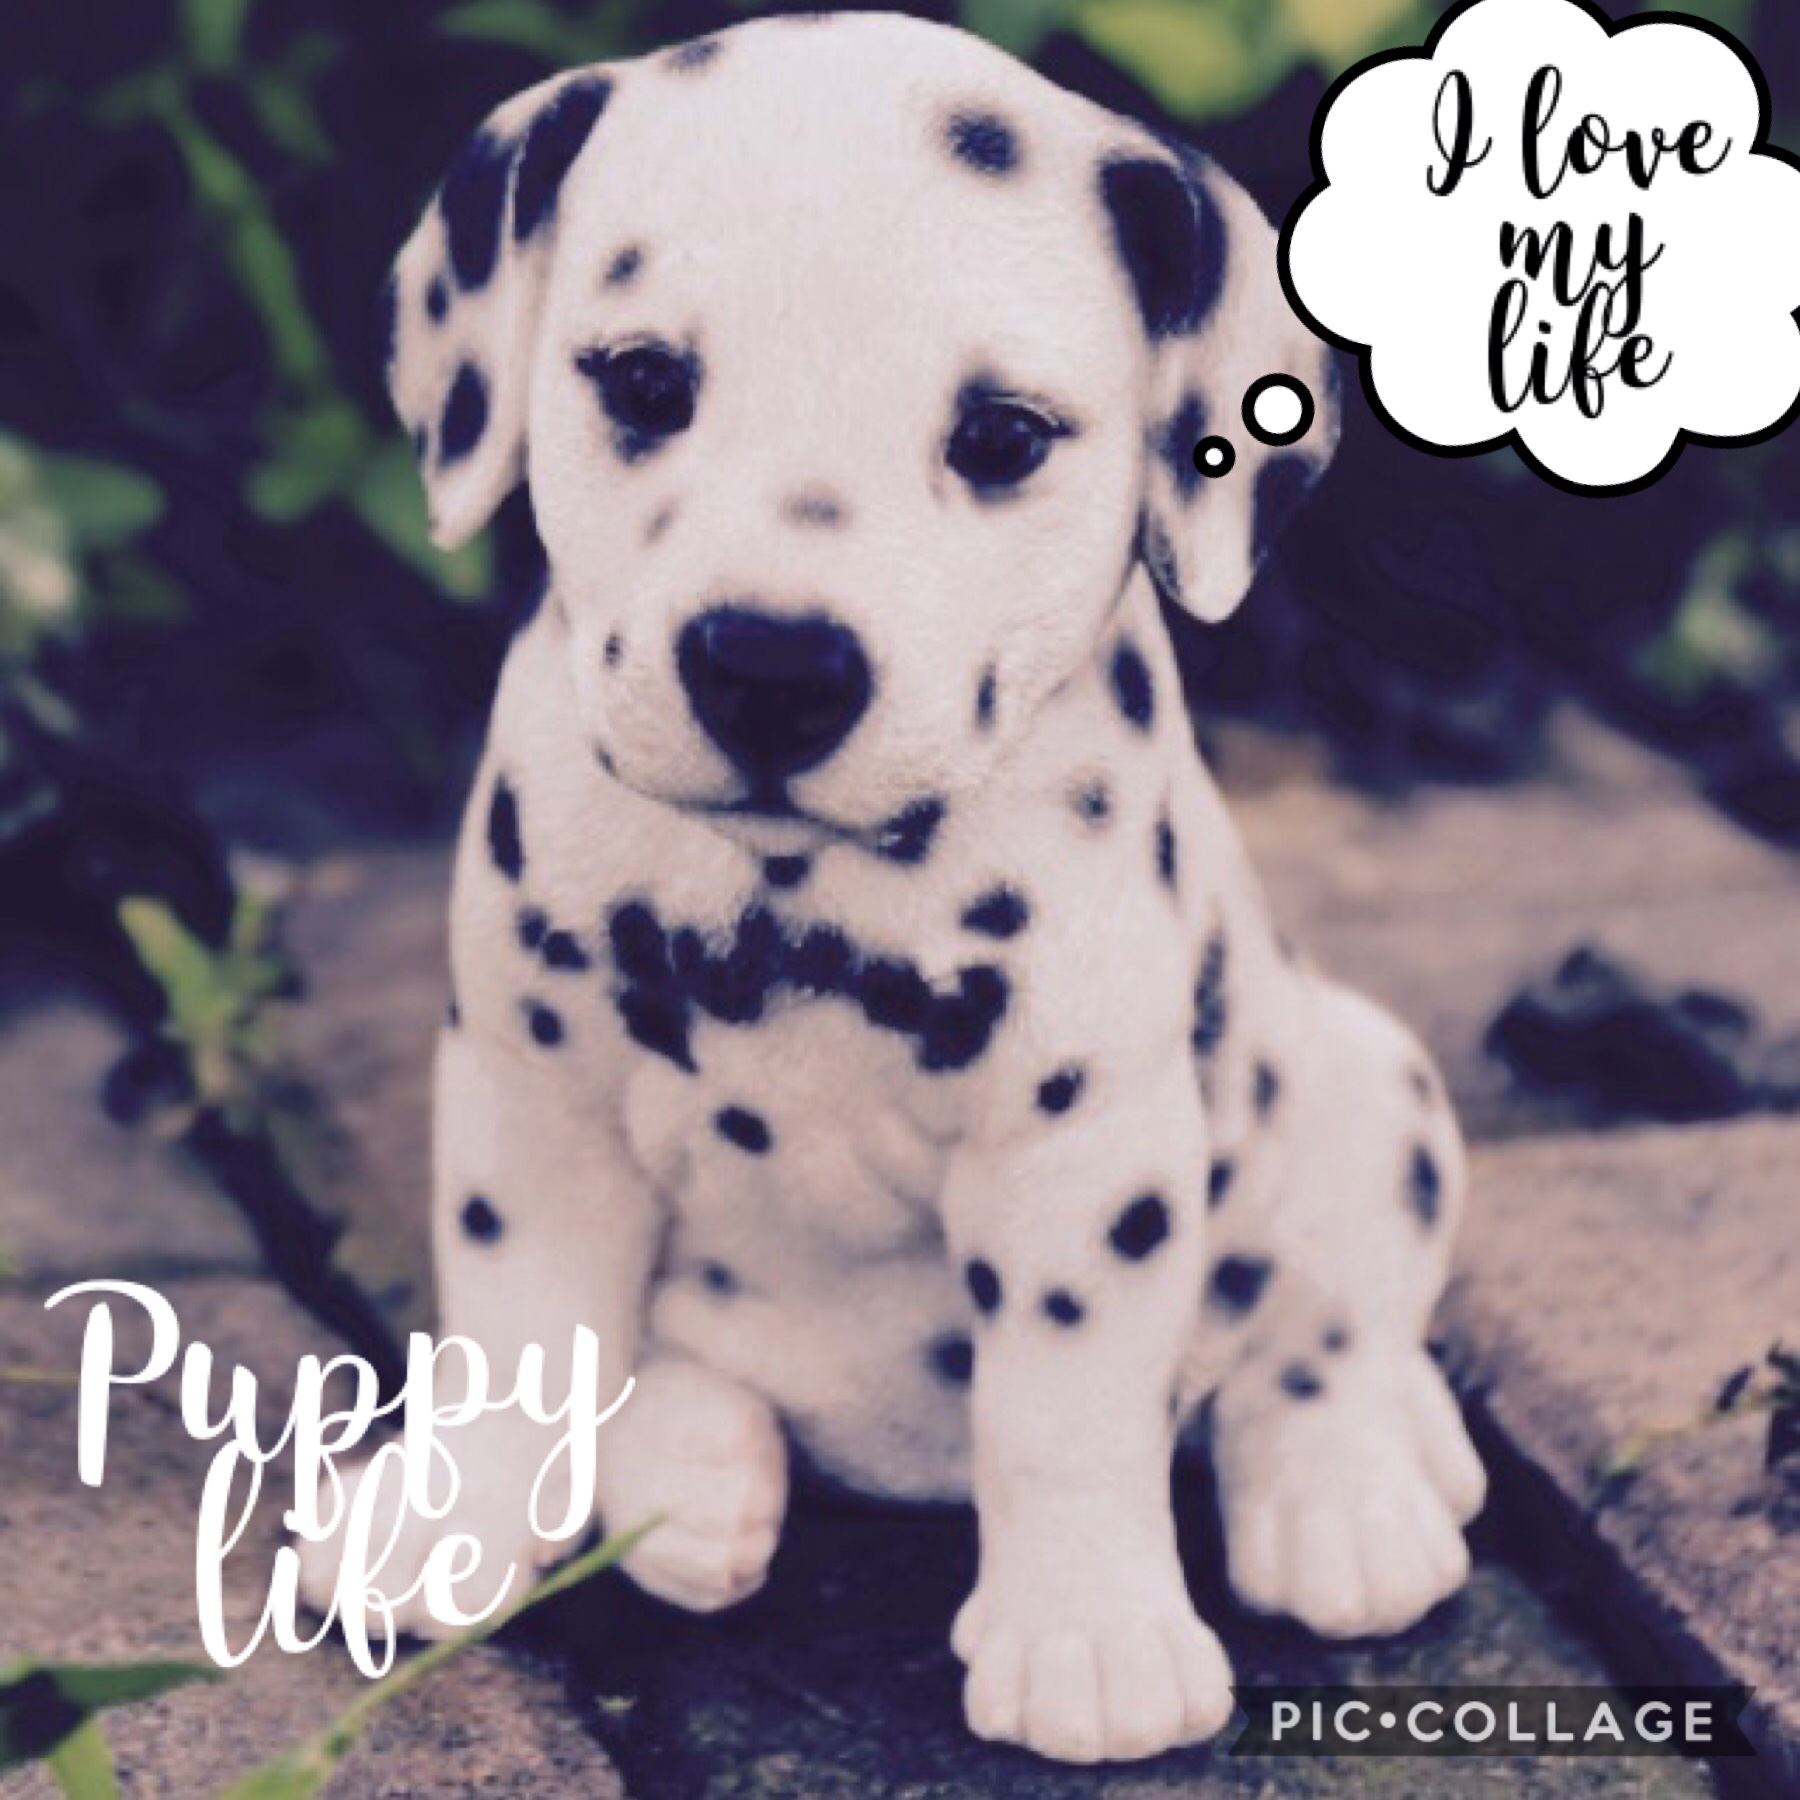 Puppy life hope you like it tap 




Follow me please!!!
